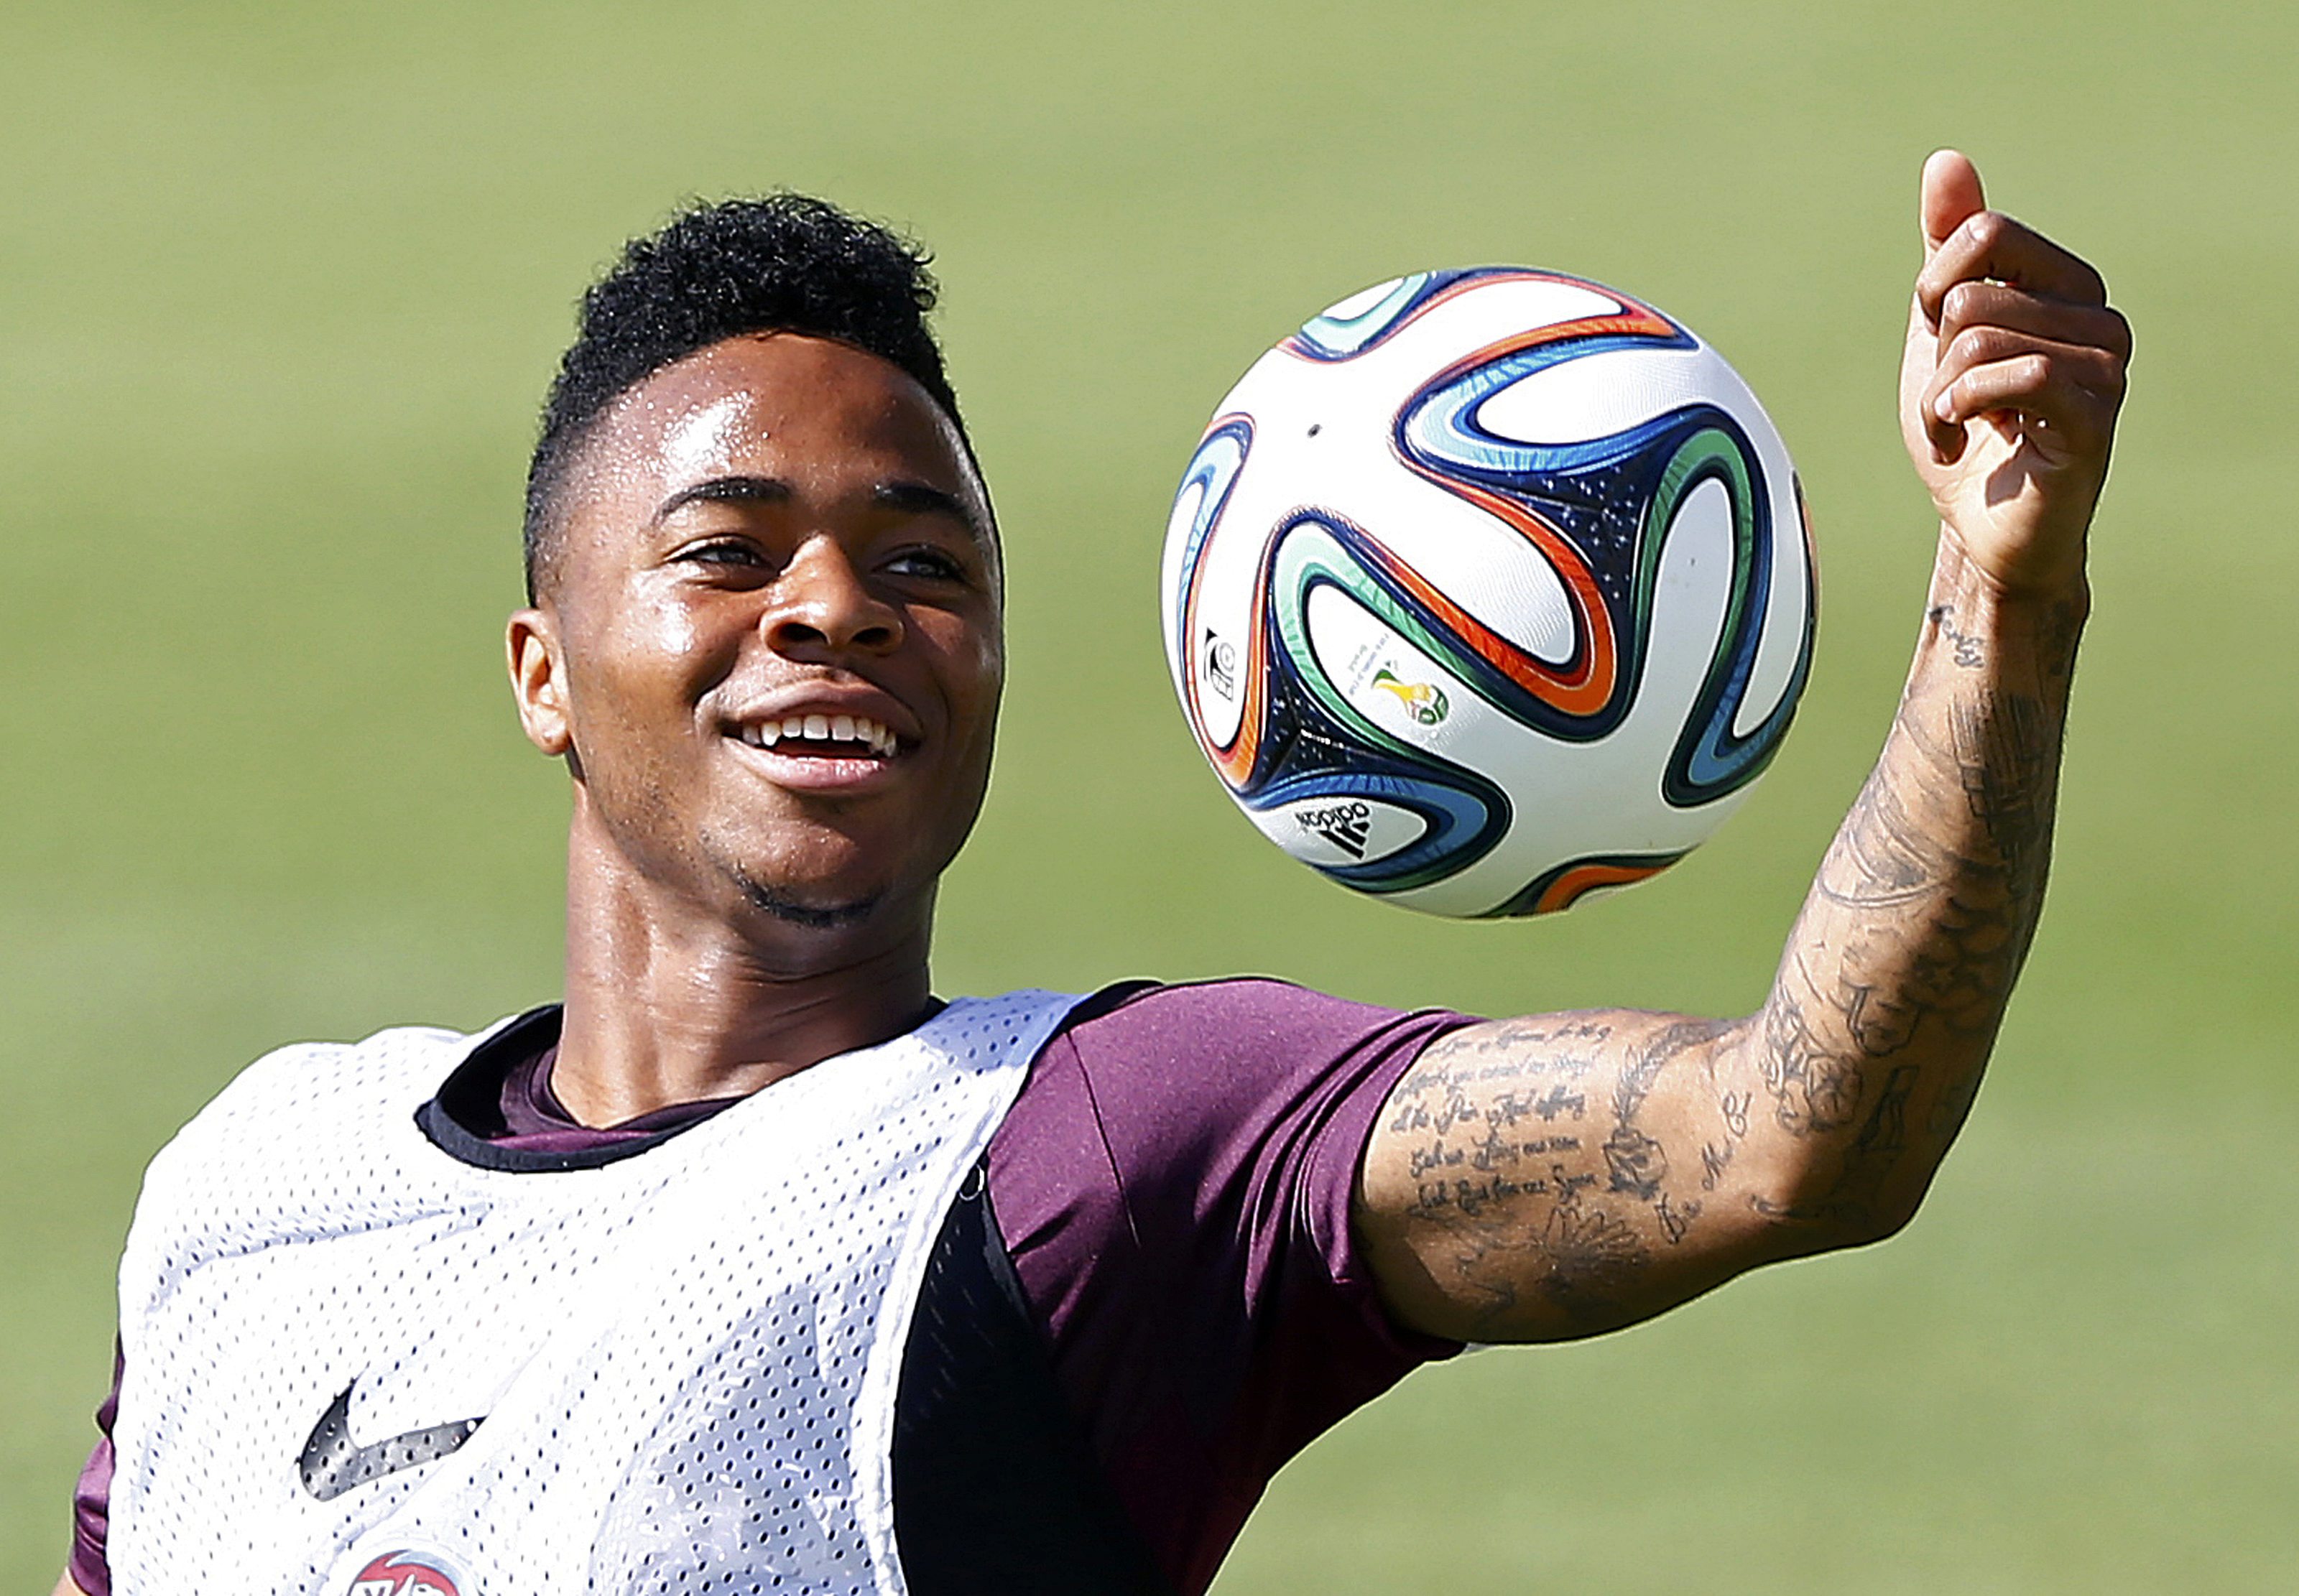 England's Raheem Sterling catches the ball during a soccer training session ahead of the 2014 World Cup in Rio de Janeiro, June 9, 2014.    REUTERS/Darren Staples (BRAZIL  - Tags: SOCCER SPORT WORLD CUP)  